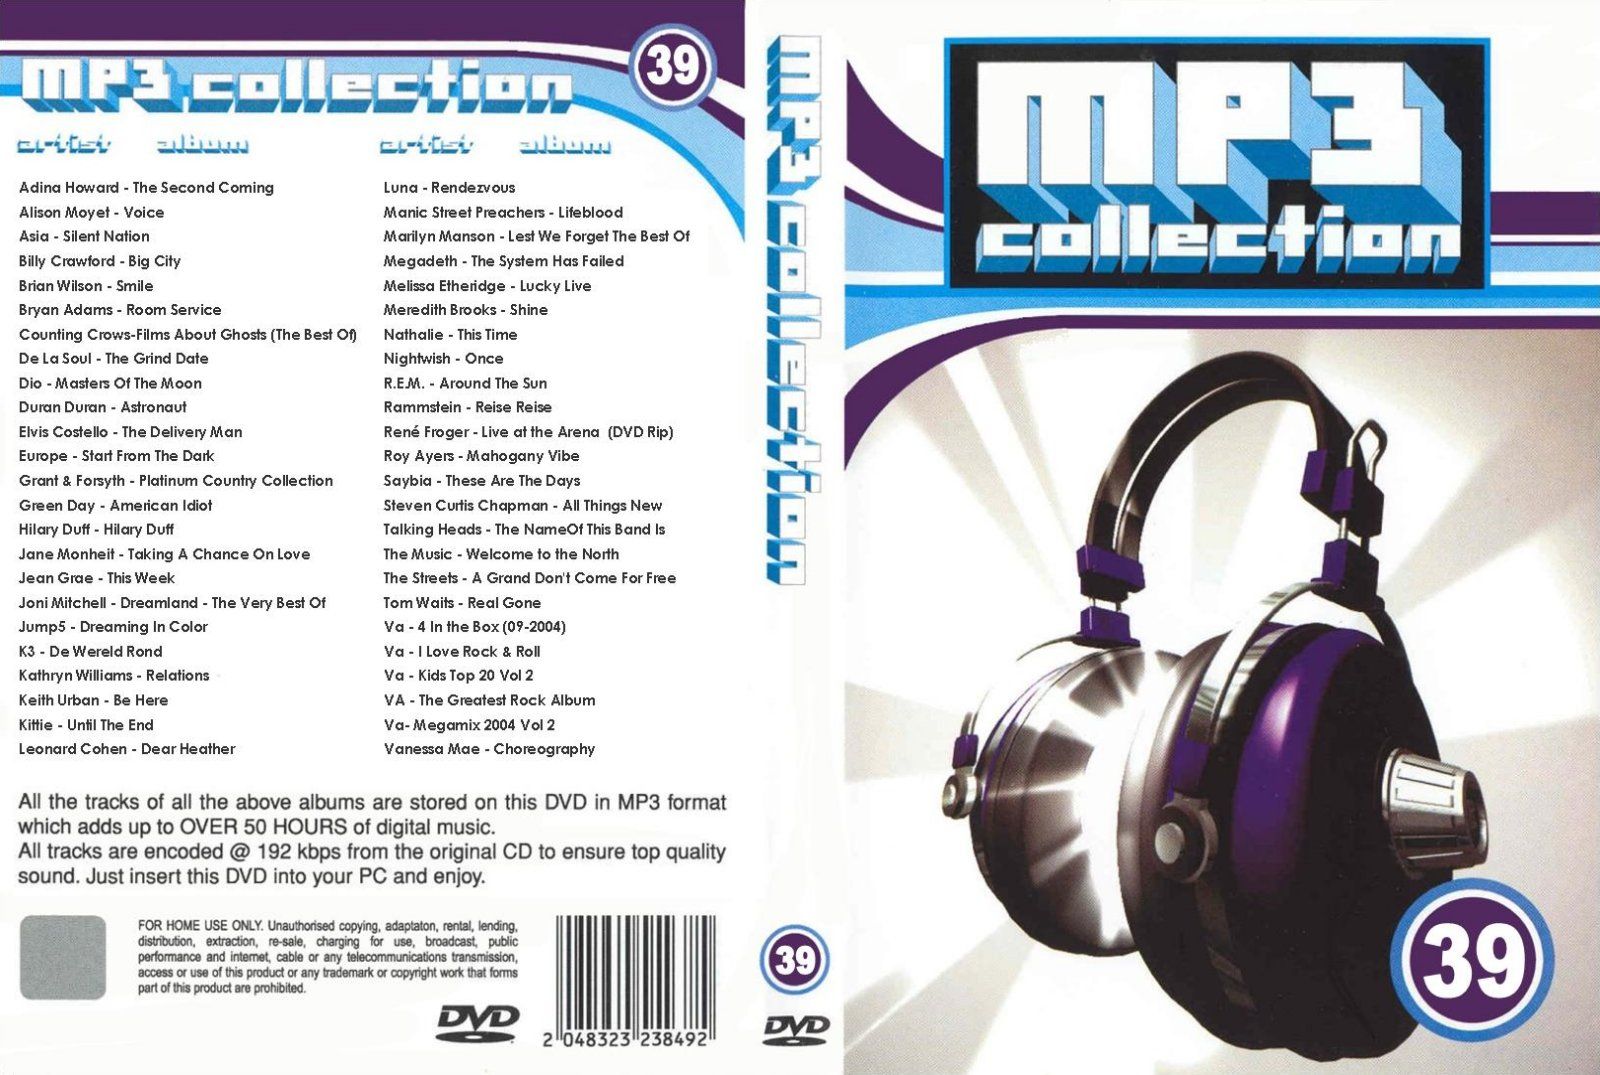 Mp3 Collection Vol 39 Dvd Dvd Covers Cover Century Over 500 000 Album Art Covers For Free